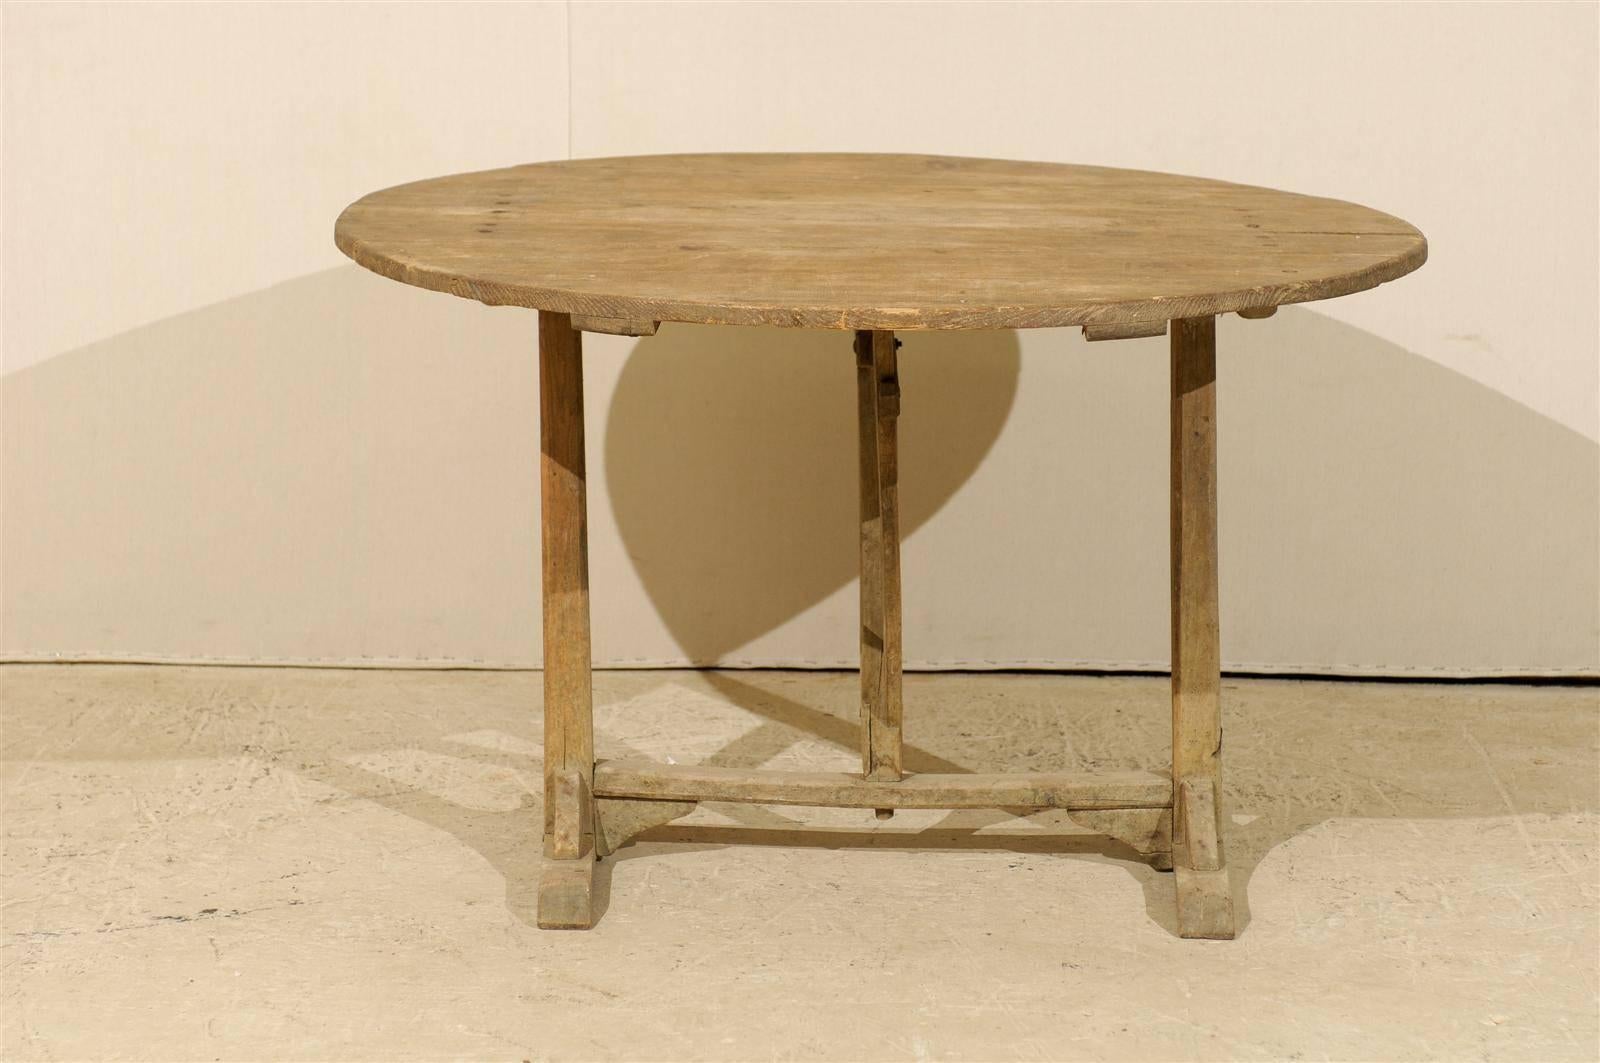 A French wine tasting table. This early 20th century table has a nicely aged pale wood finish. This tilt-top table is supported by a butterfly wedge.